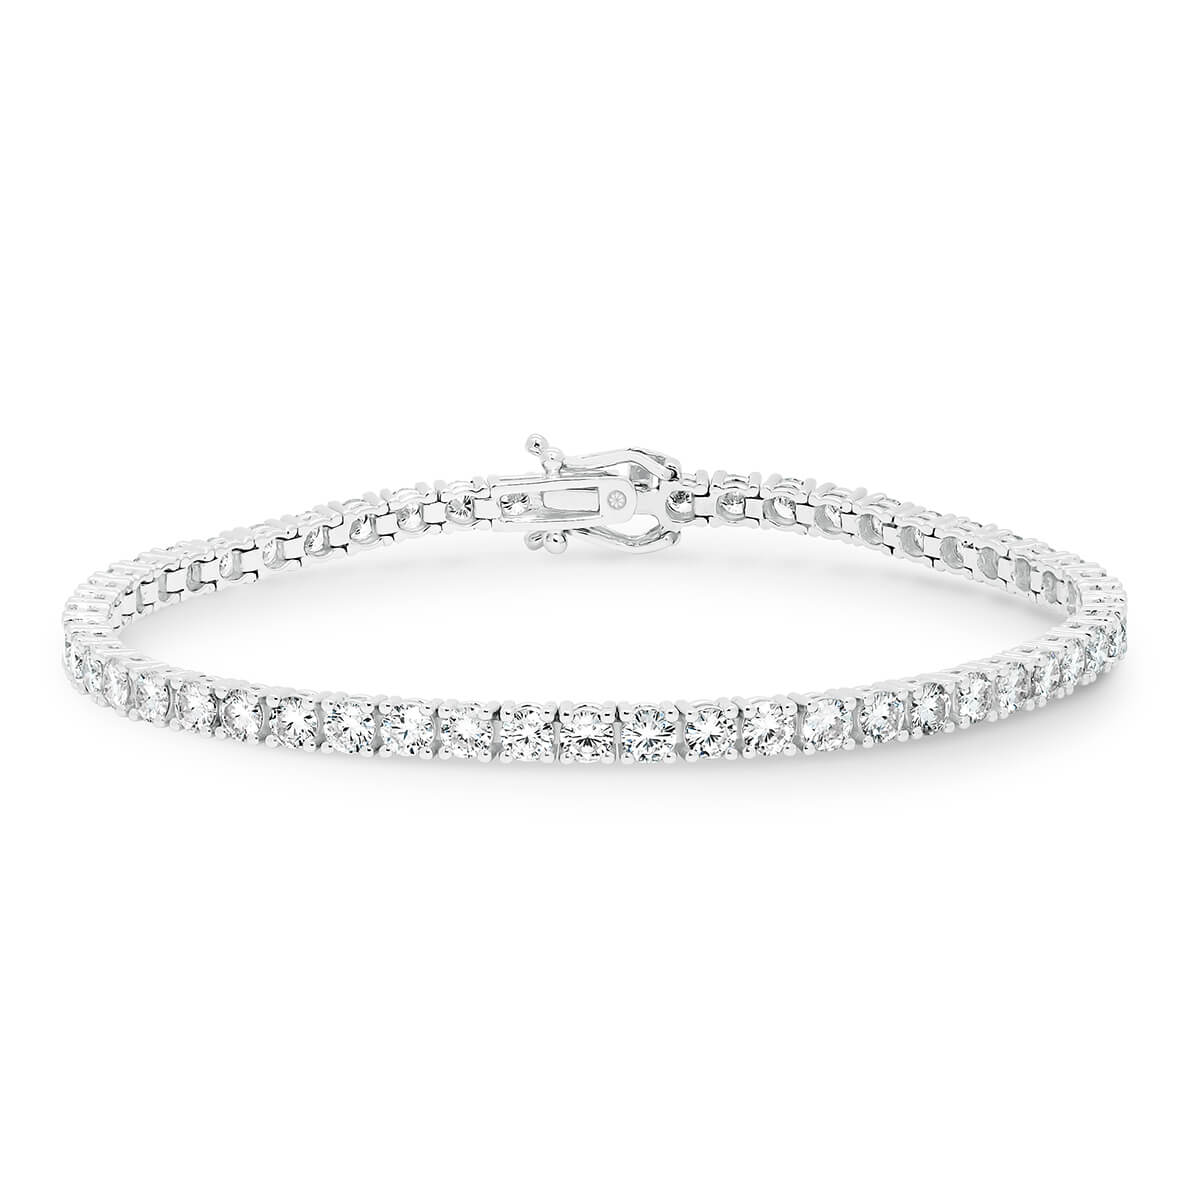 Mikayla 3.0 Lgd Classic 4-Prong Tennis Bracelet In 18K Gold With Safety Clasp